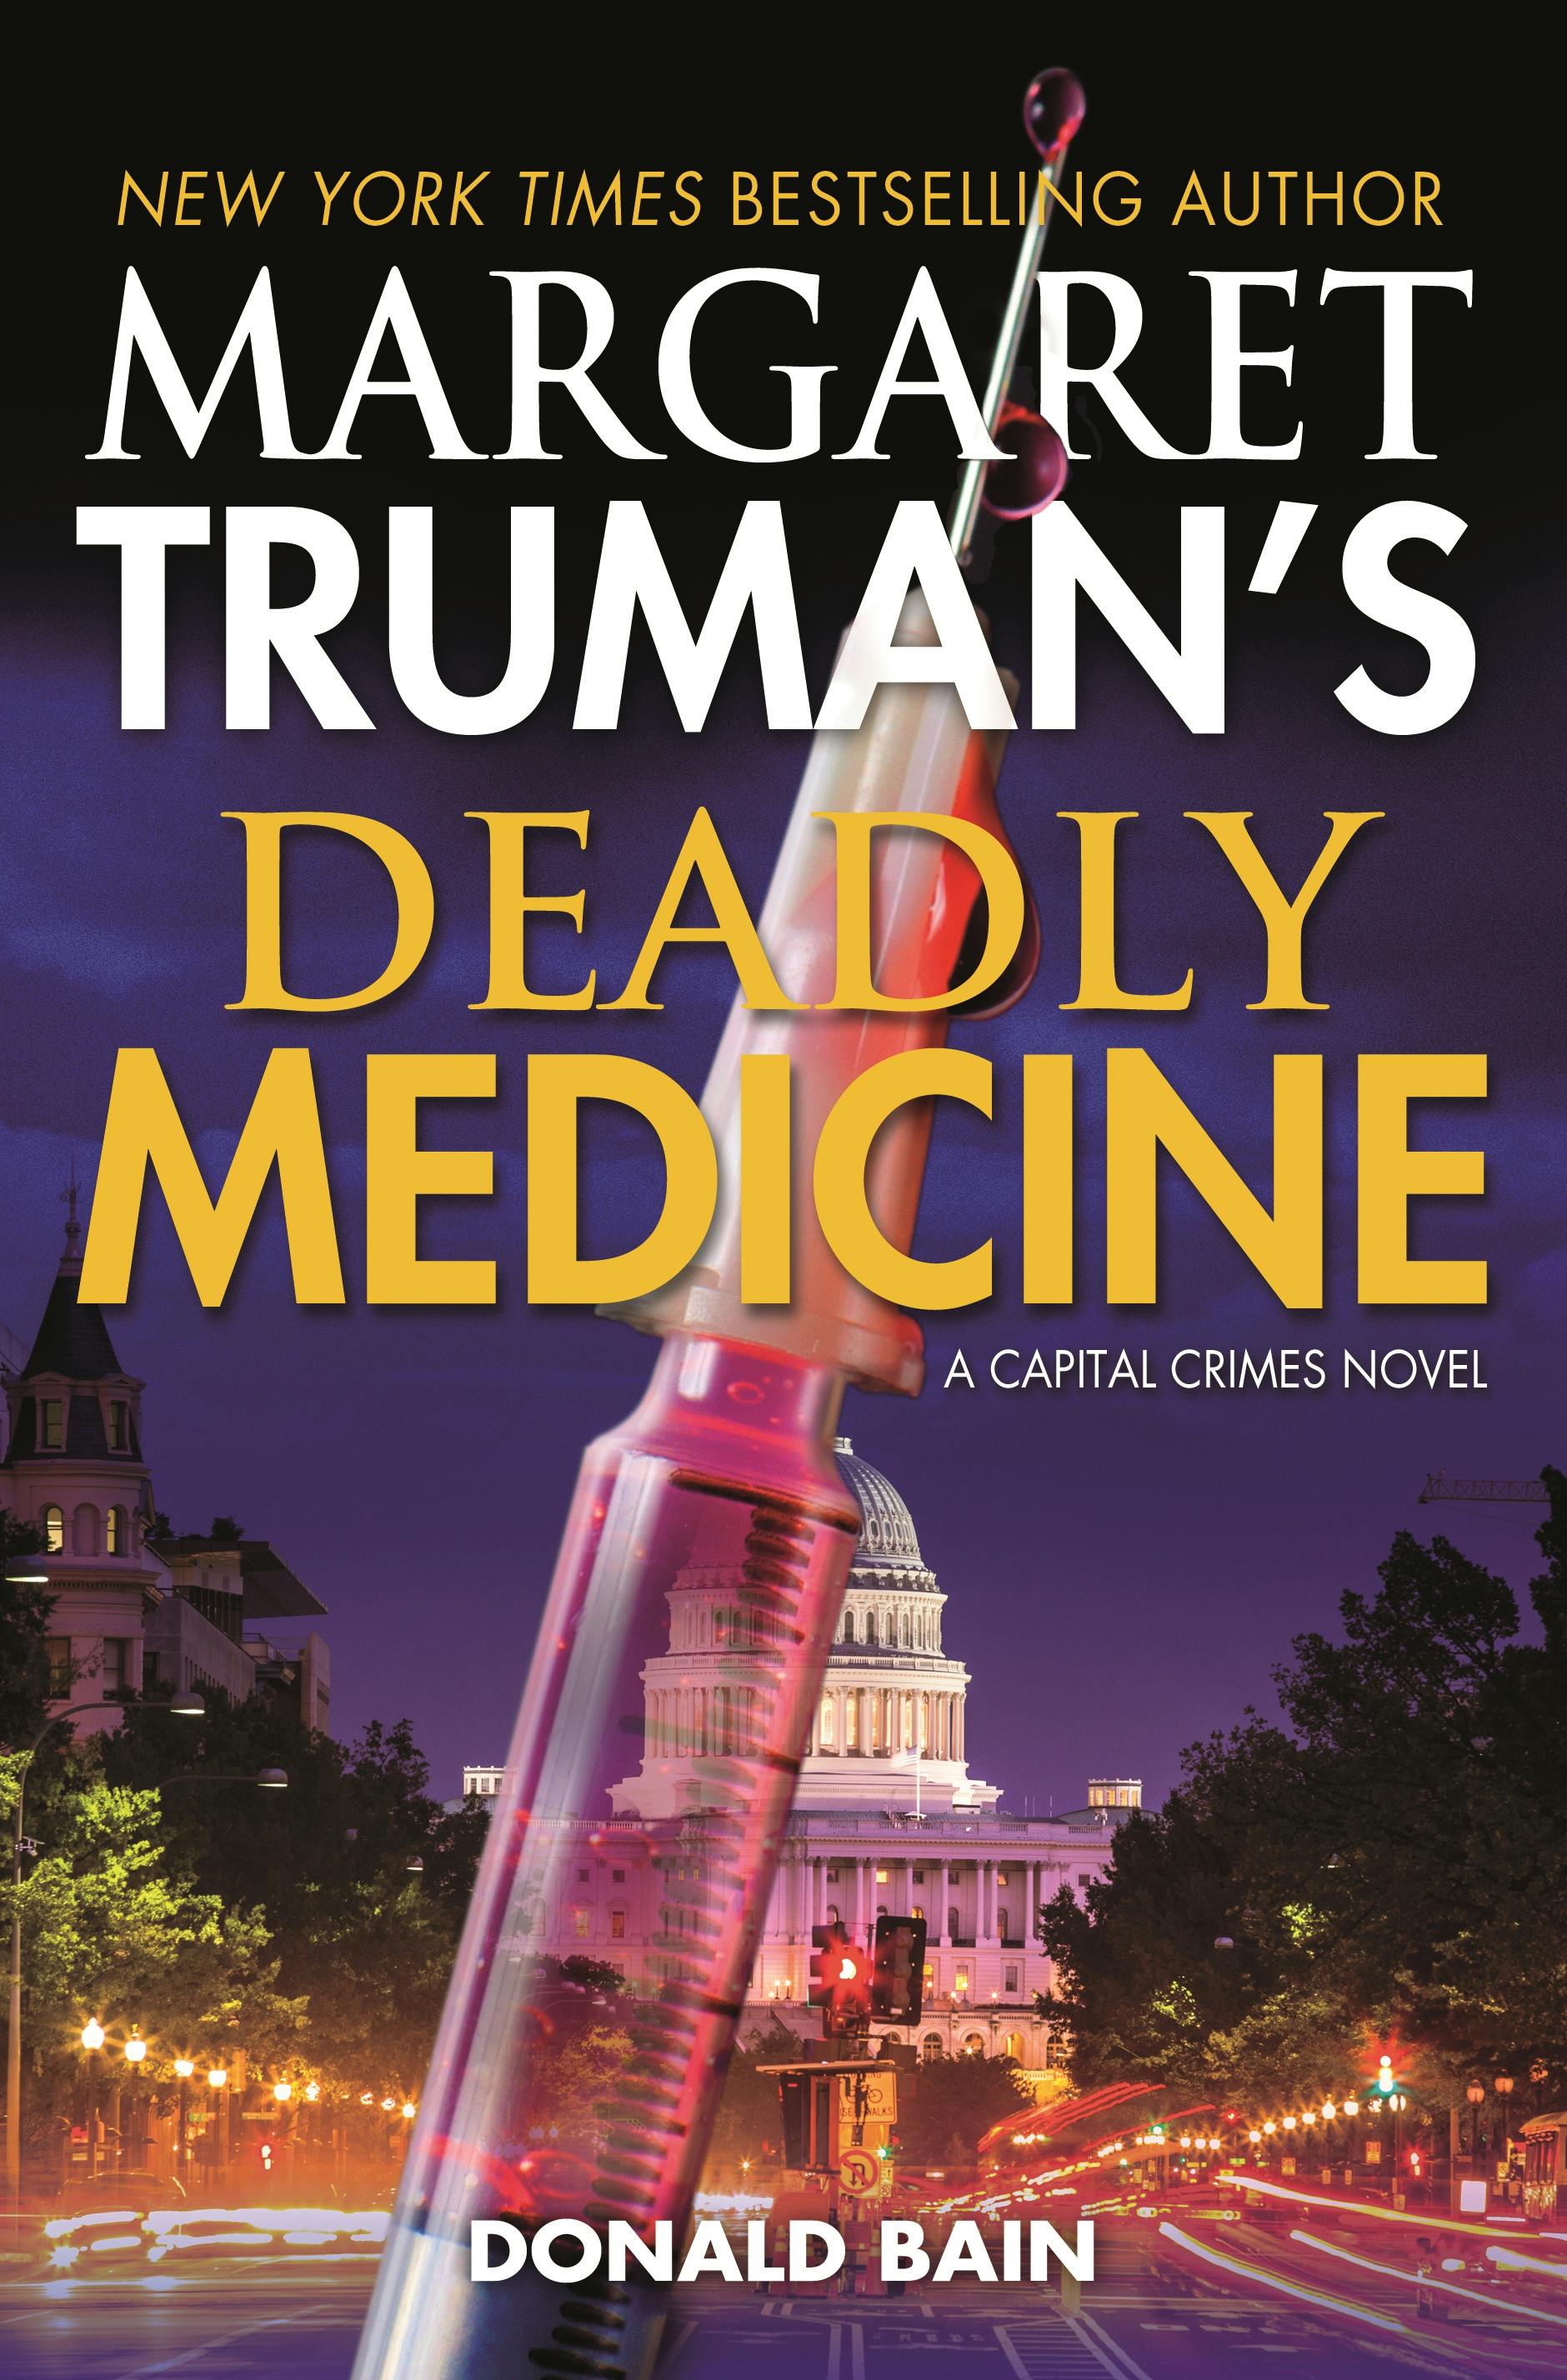 Cover for the book titled as: Margaret Truman's Deadly Medicine